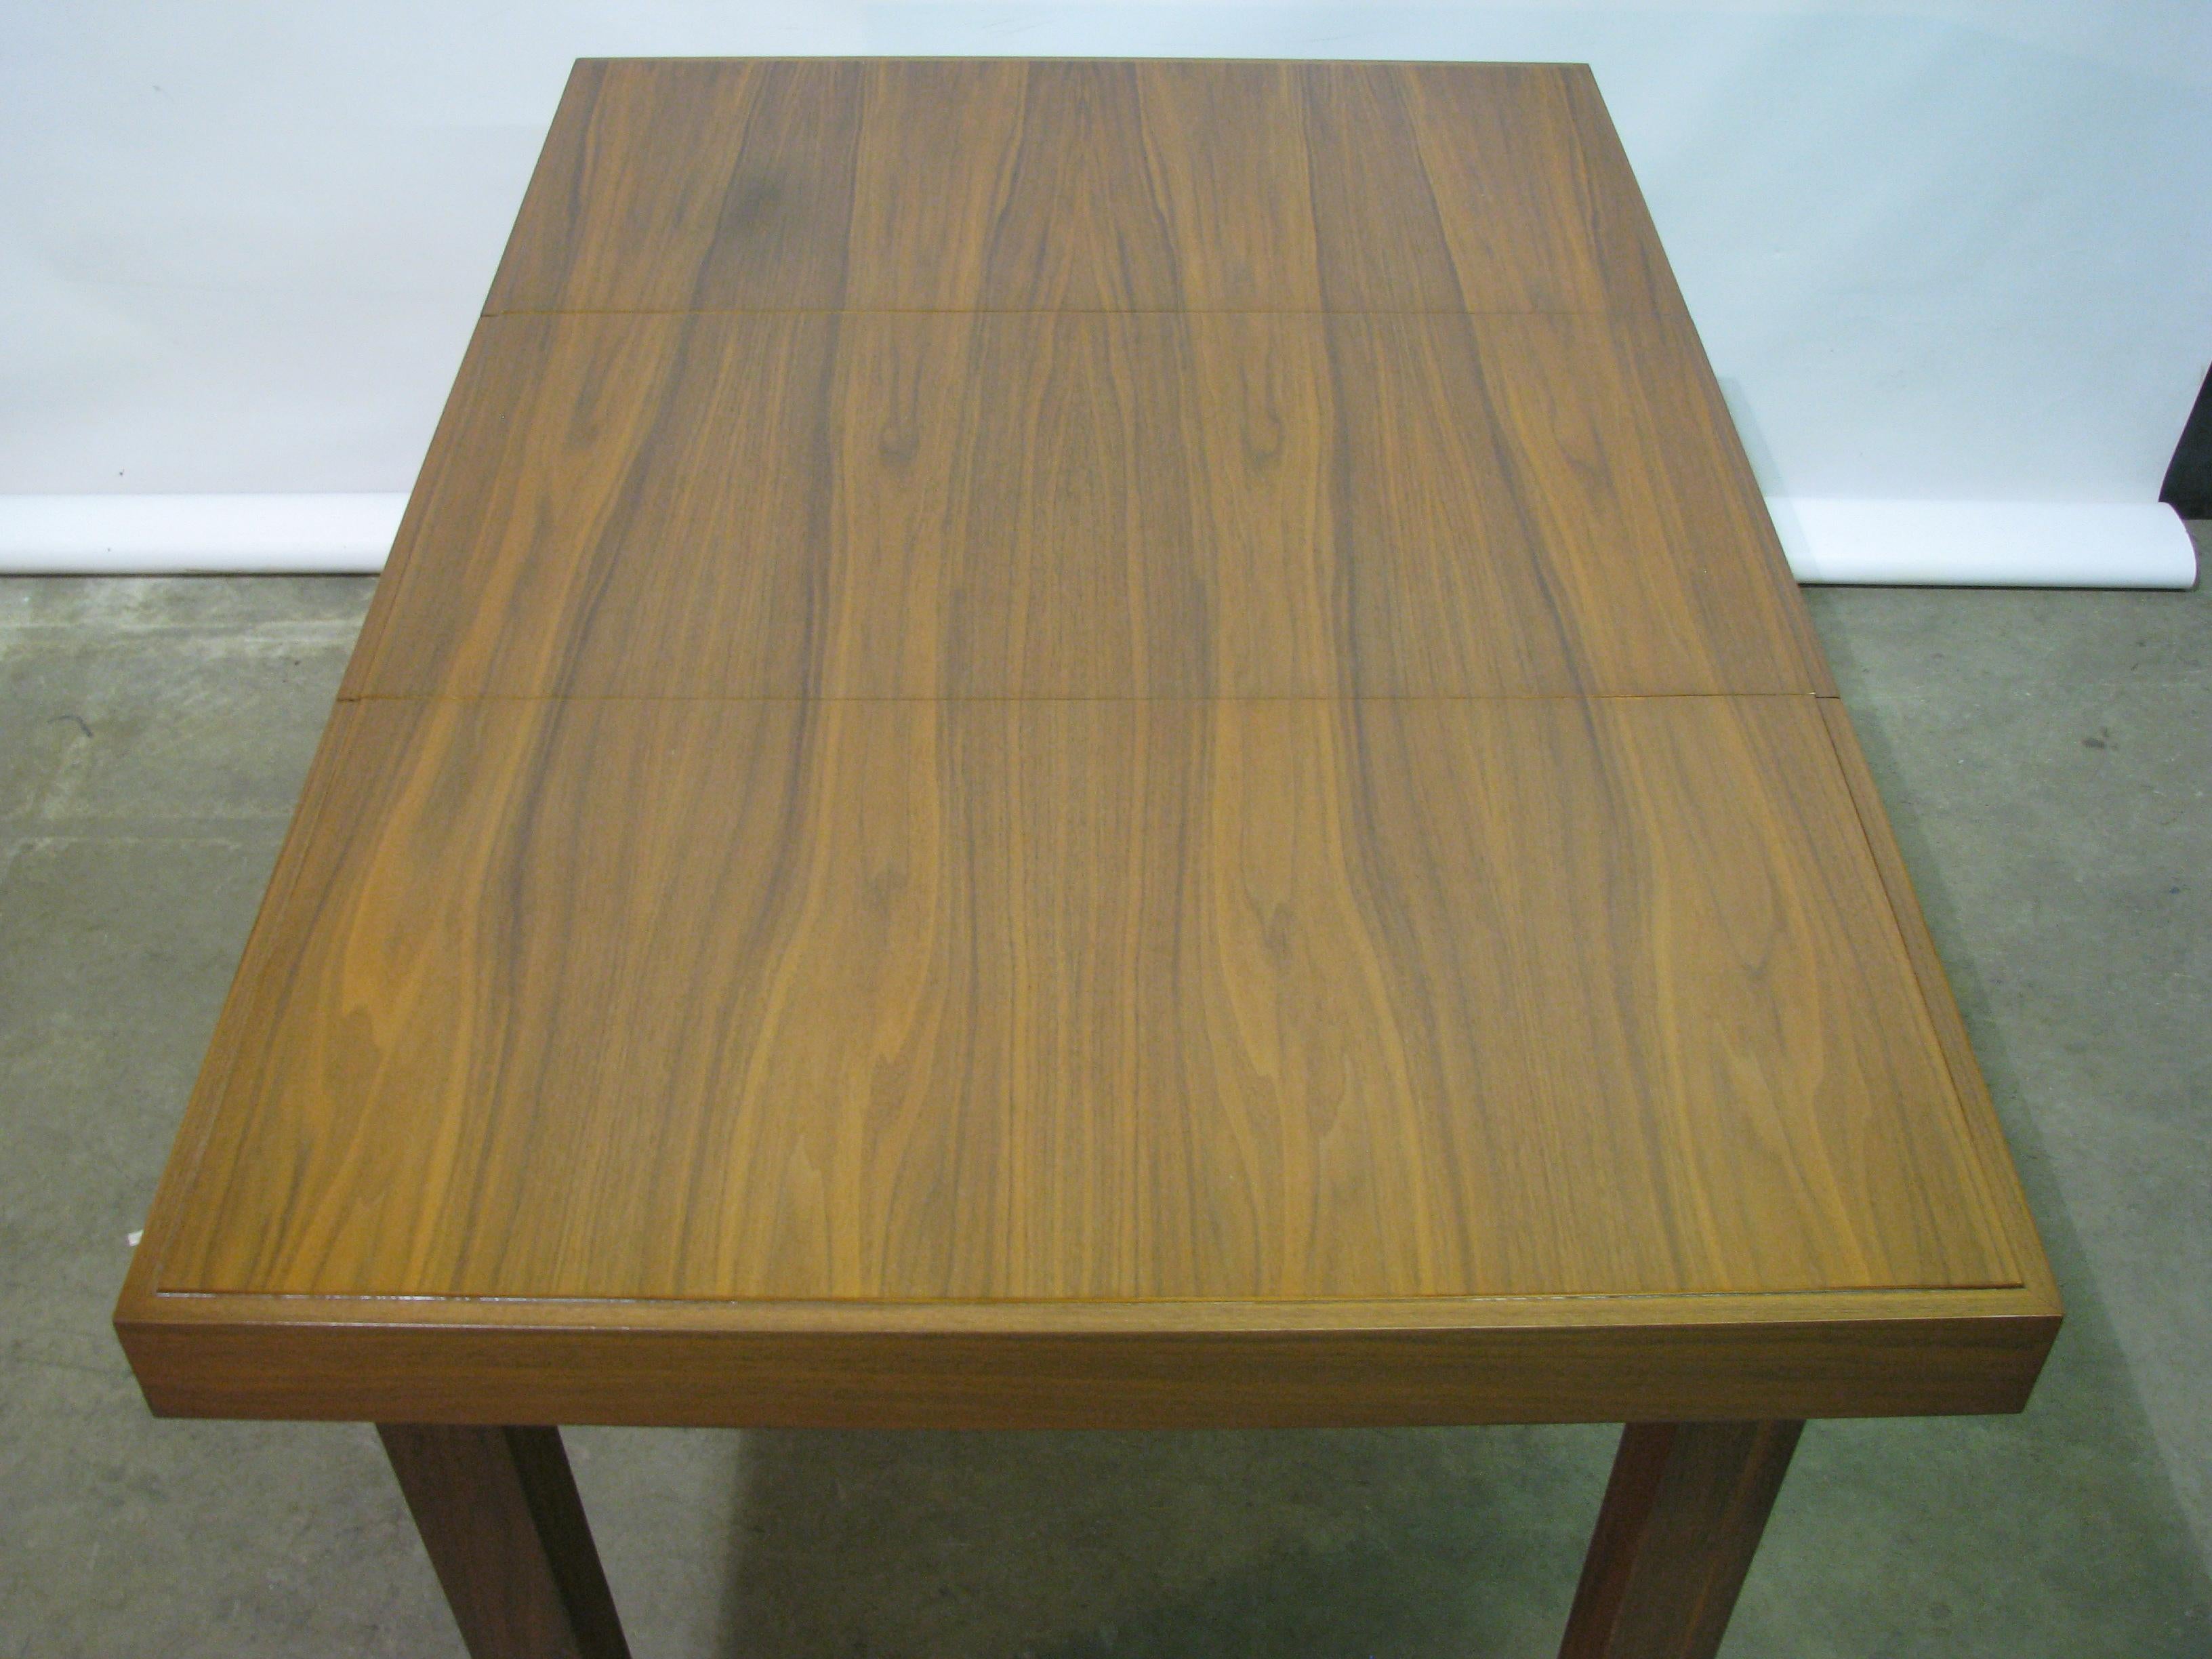 Scarce 1950s dining table with self-storing leaves by George Nelson for Herman Miller. Striking walnut veneers that are continuous across the three top sections of the main table. A 3.25